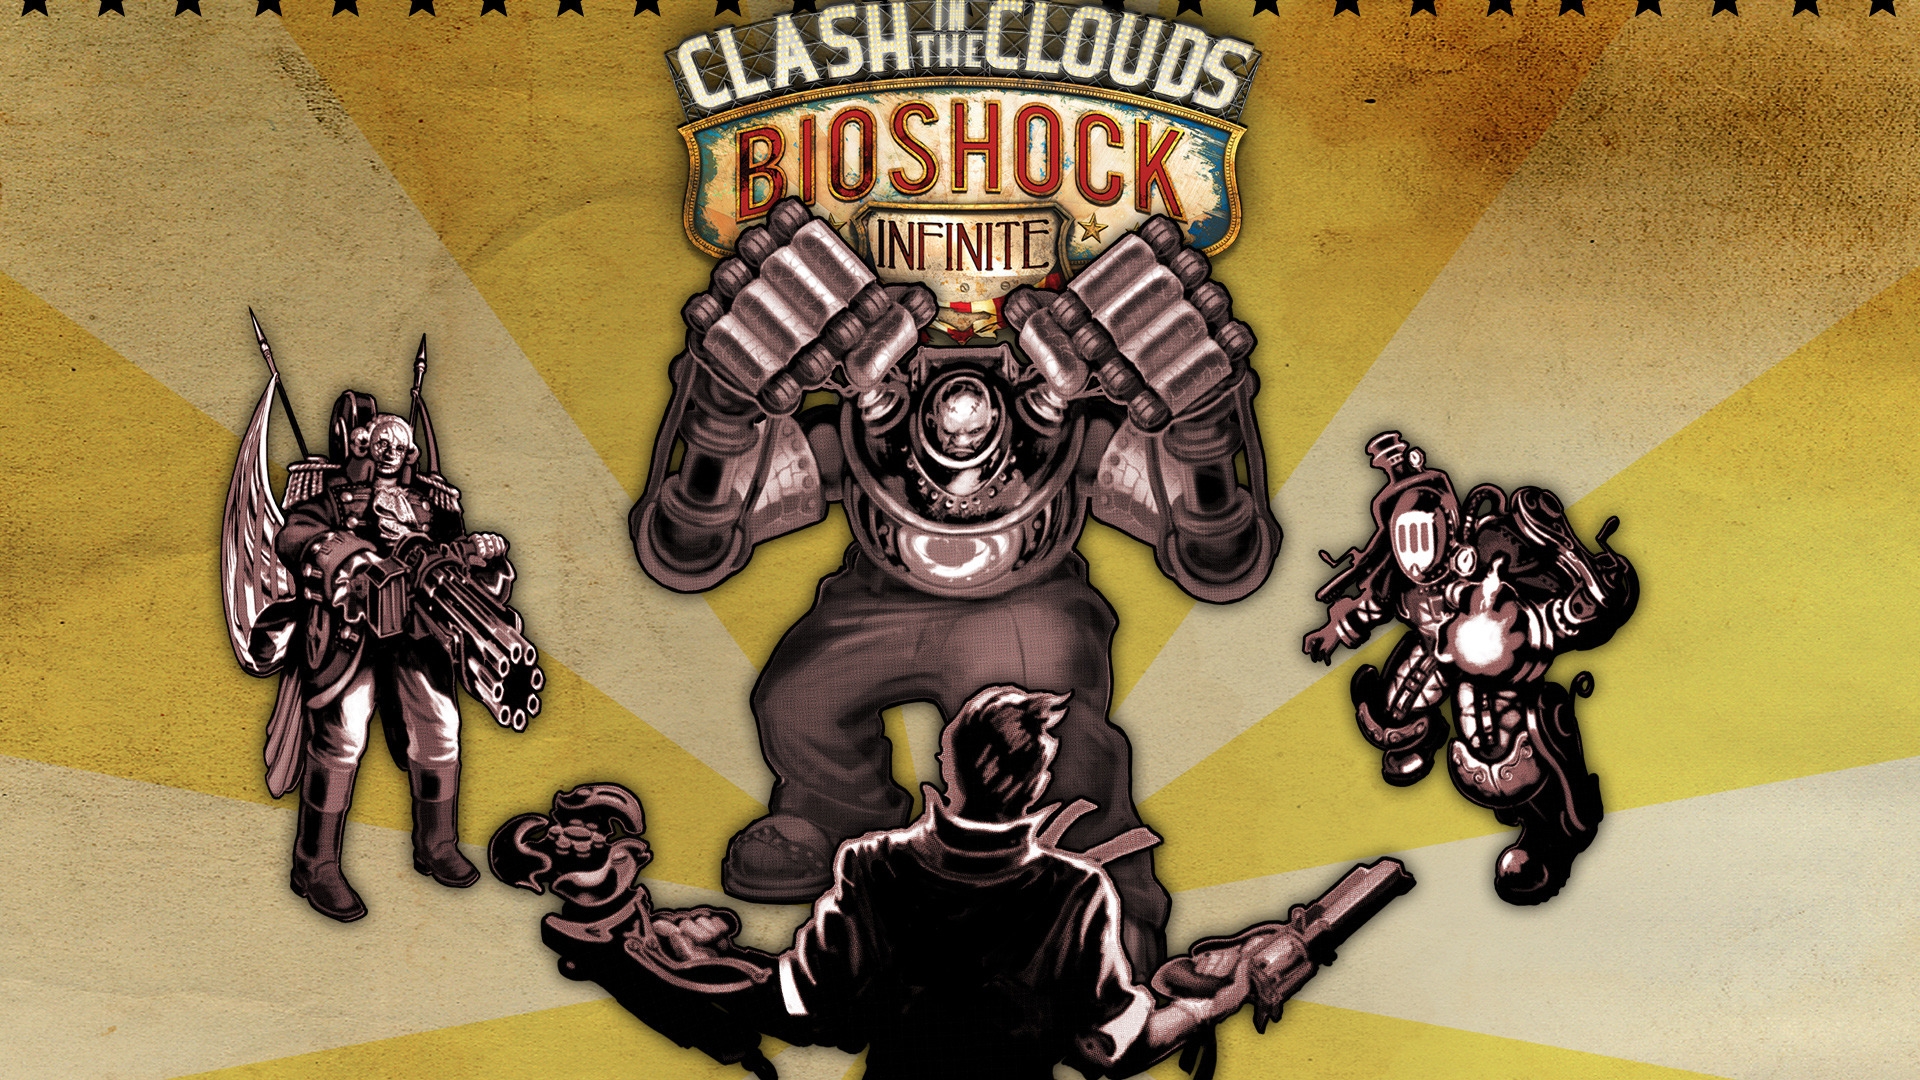 BioShock Infinite Clash in the Clouds for 1920 x 1080 HDTV 1080p resolution